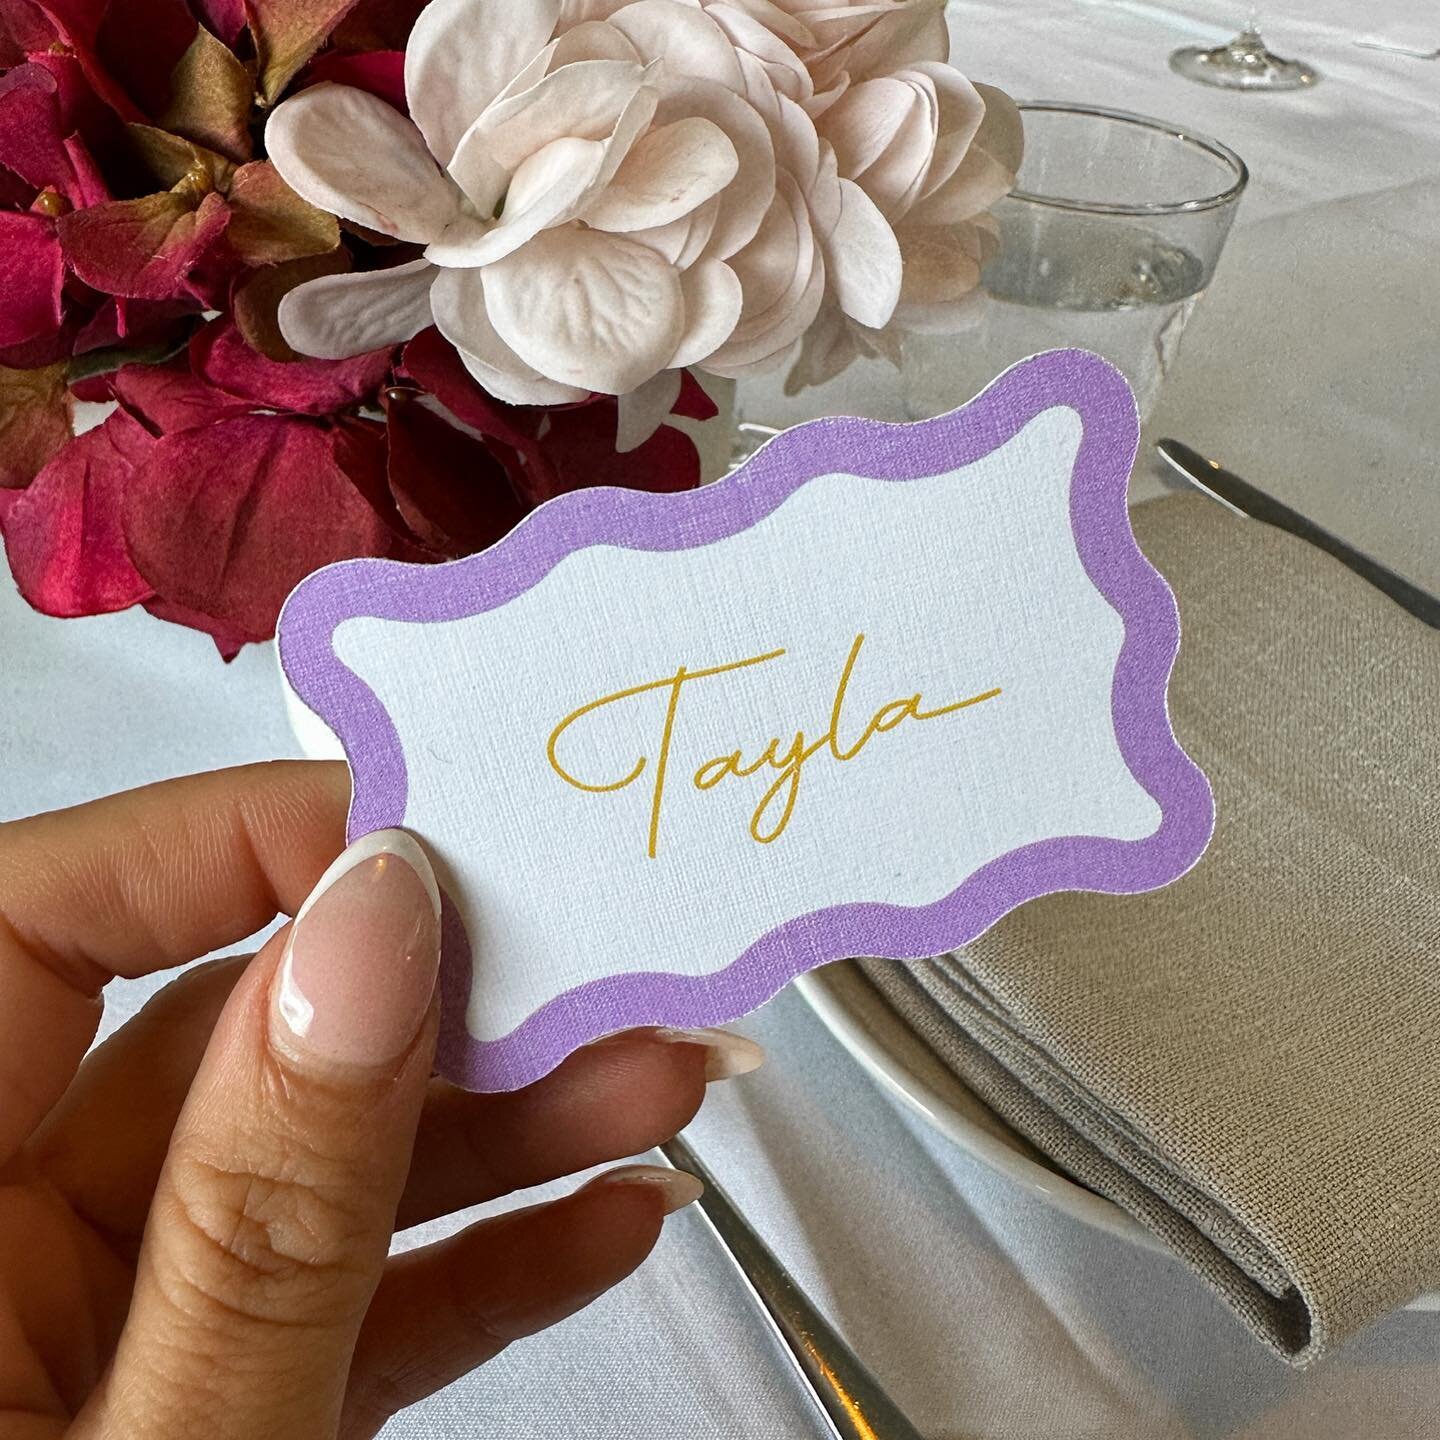 From playful typography to bold colors, our bespoke designs are the perfect conversation starter for your guests. Let us help you create a memorable event with thoughtful details that will delight your guests ✨